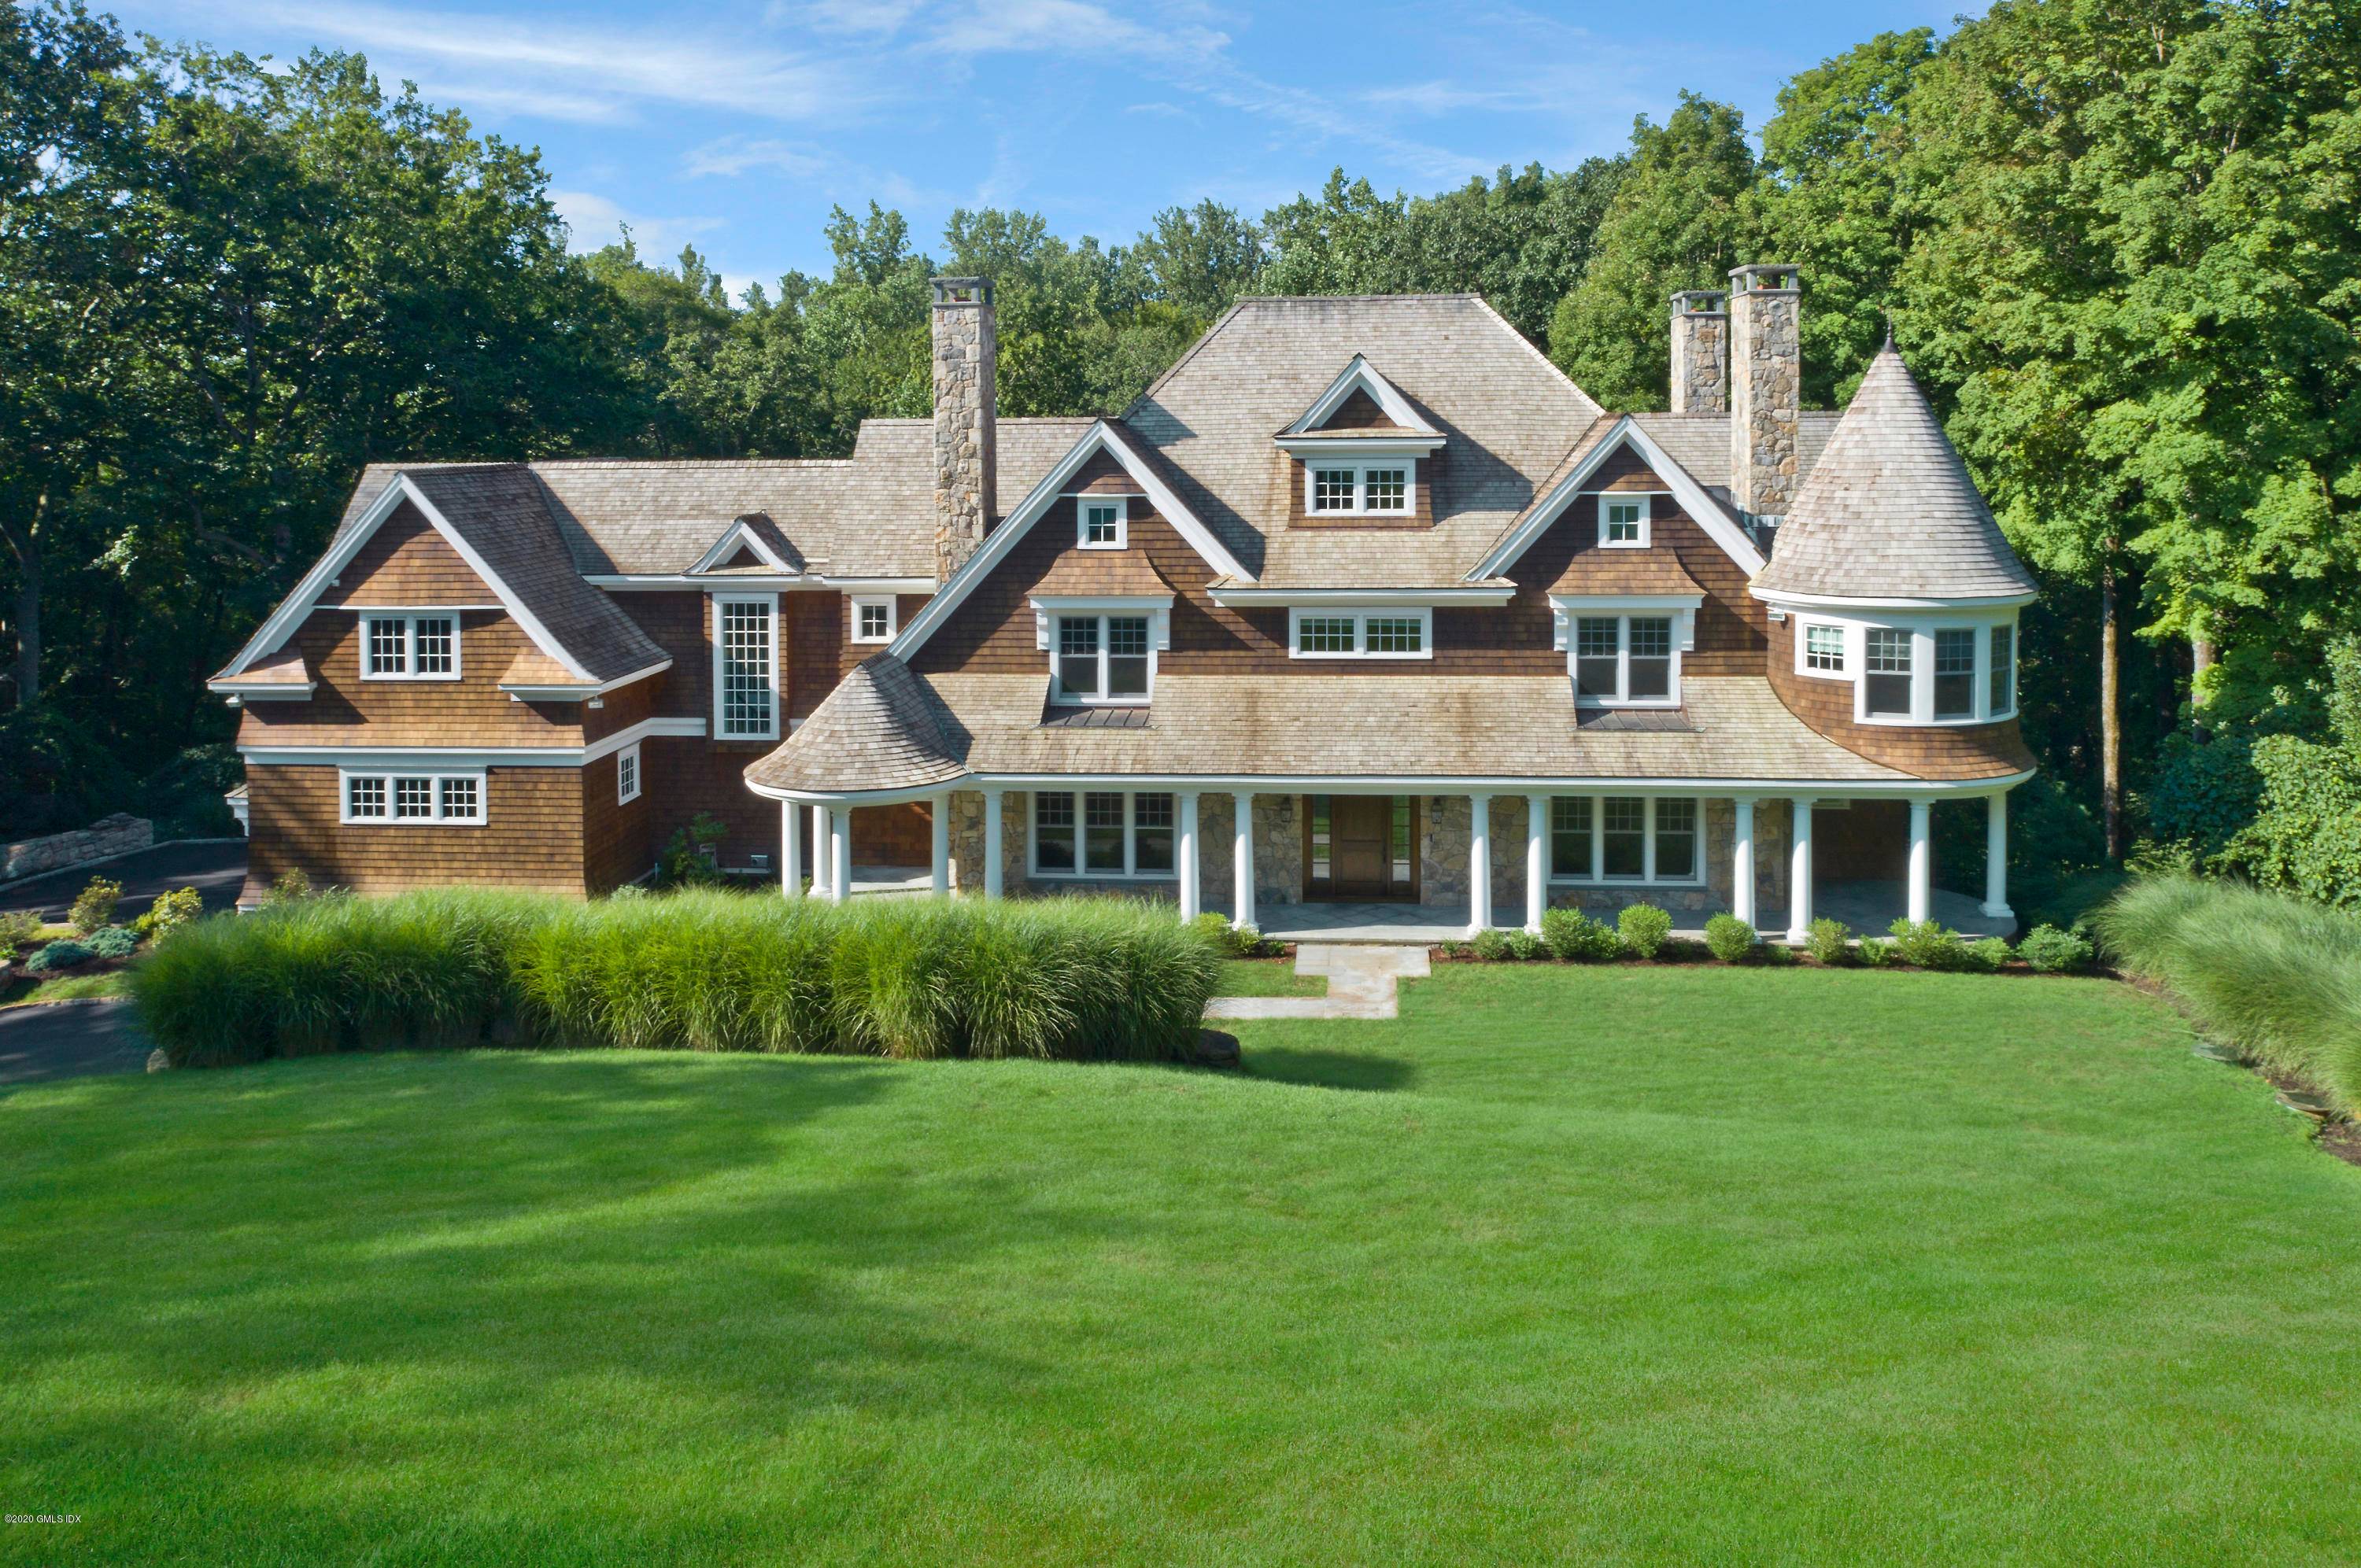 Set in a premier Back country location, this stunning Cosmopolitan New England shingle style residence was designed by Steven Mueller architects, HOBI award winner for Best Spec Home in CT.